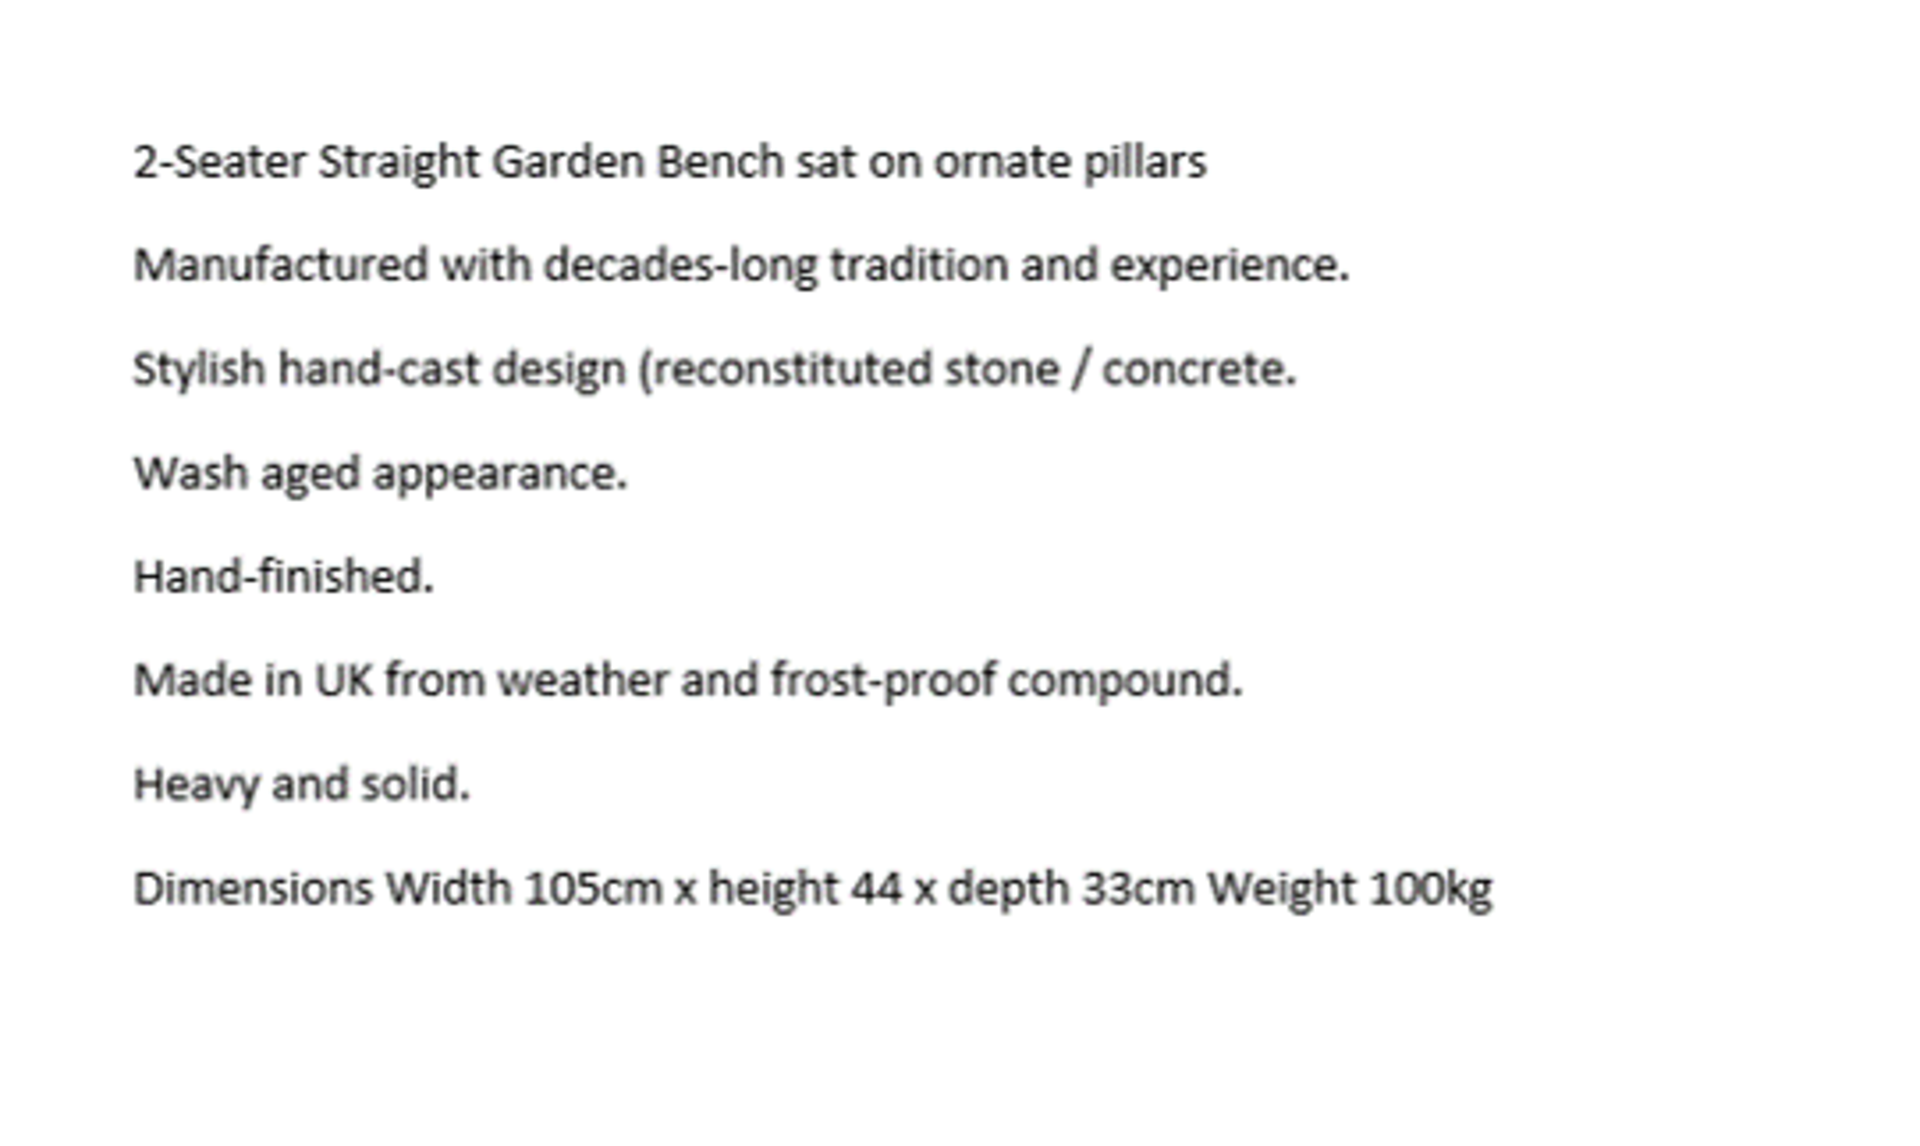 * 2 Seater Stone Garden Bench - Image 4 of 4